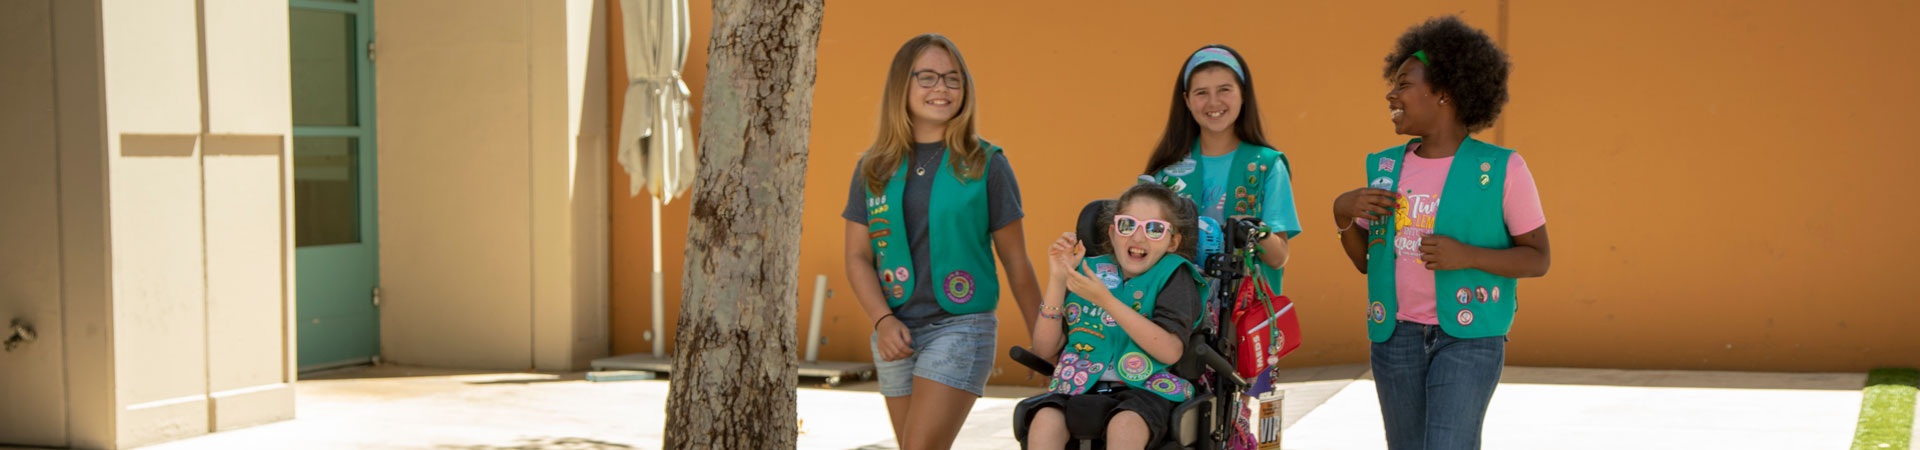  Four Girl Scouts wearing green vests decorated with various pins and badges. Three are walking and one is pushing the fourth in a wheelchair. They are on a paved path lined with walks. The sun is shining. There is a bright orange wall in the background behind them. 